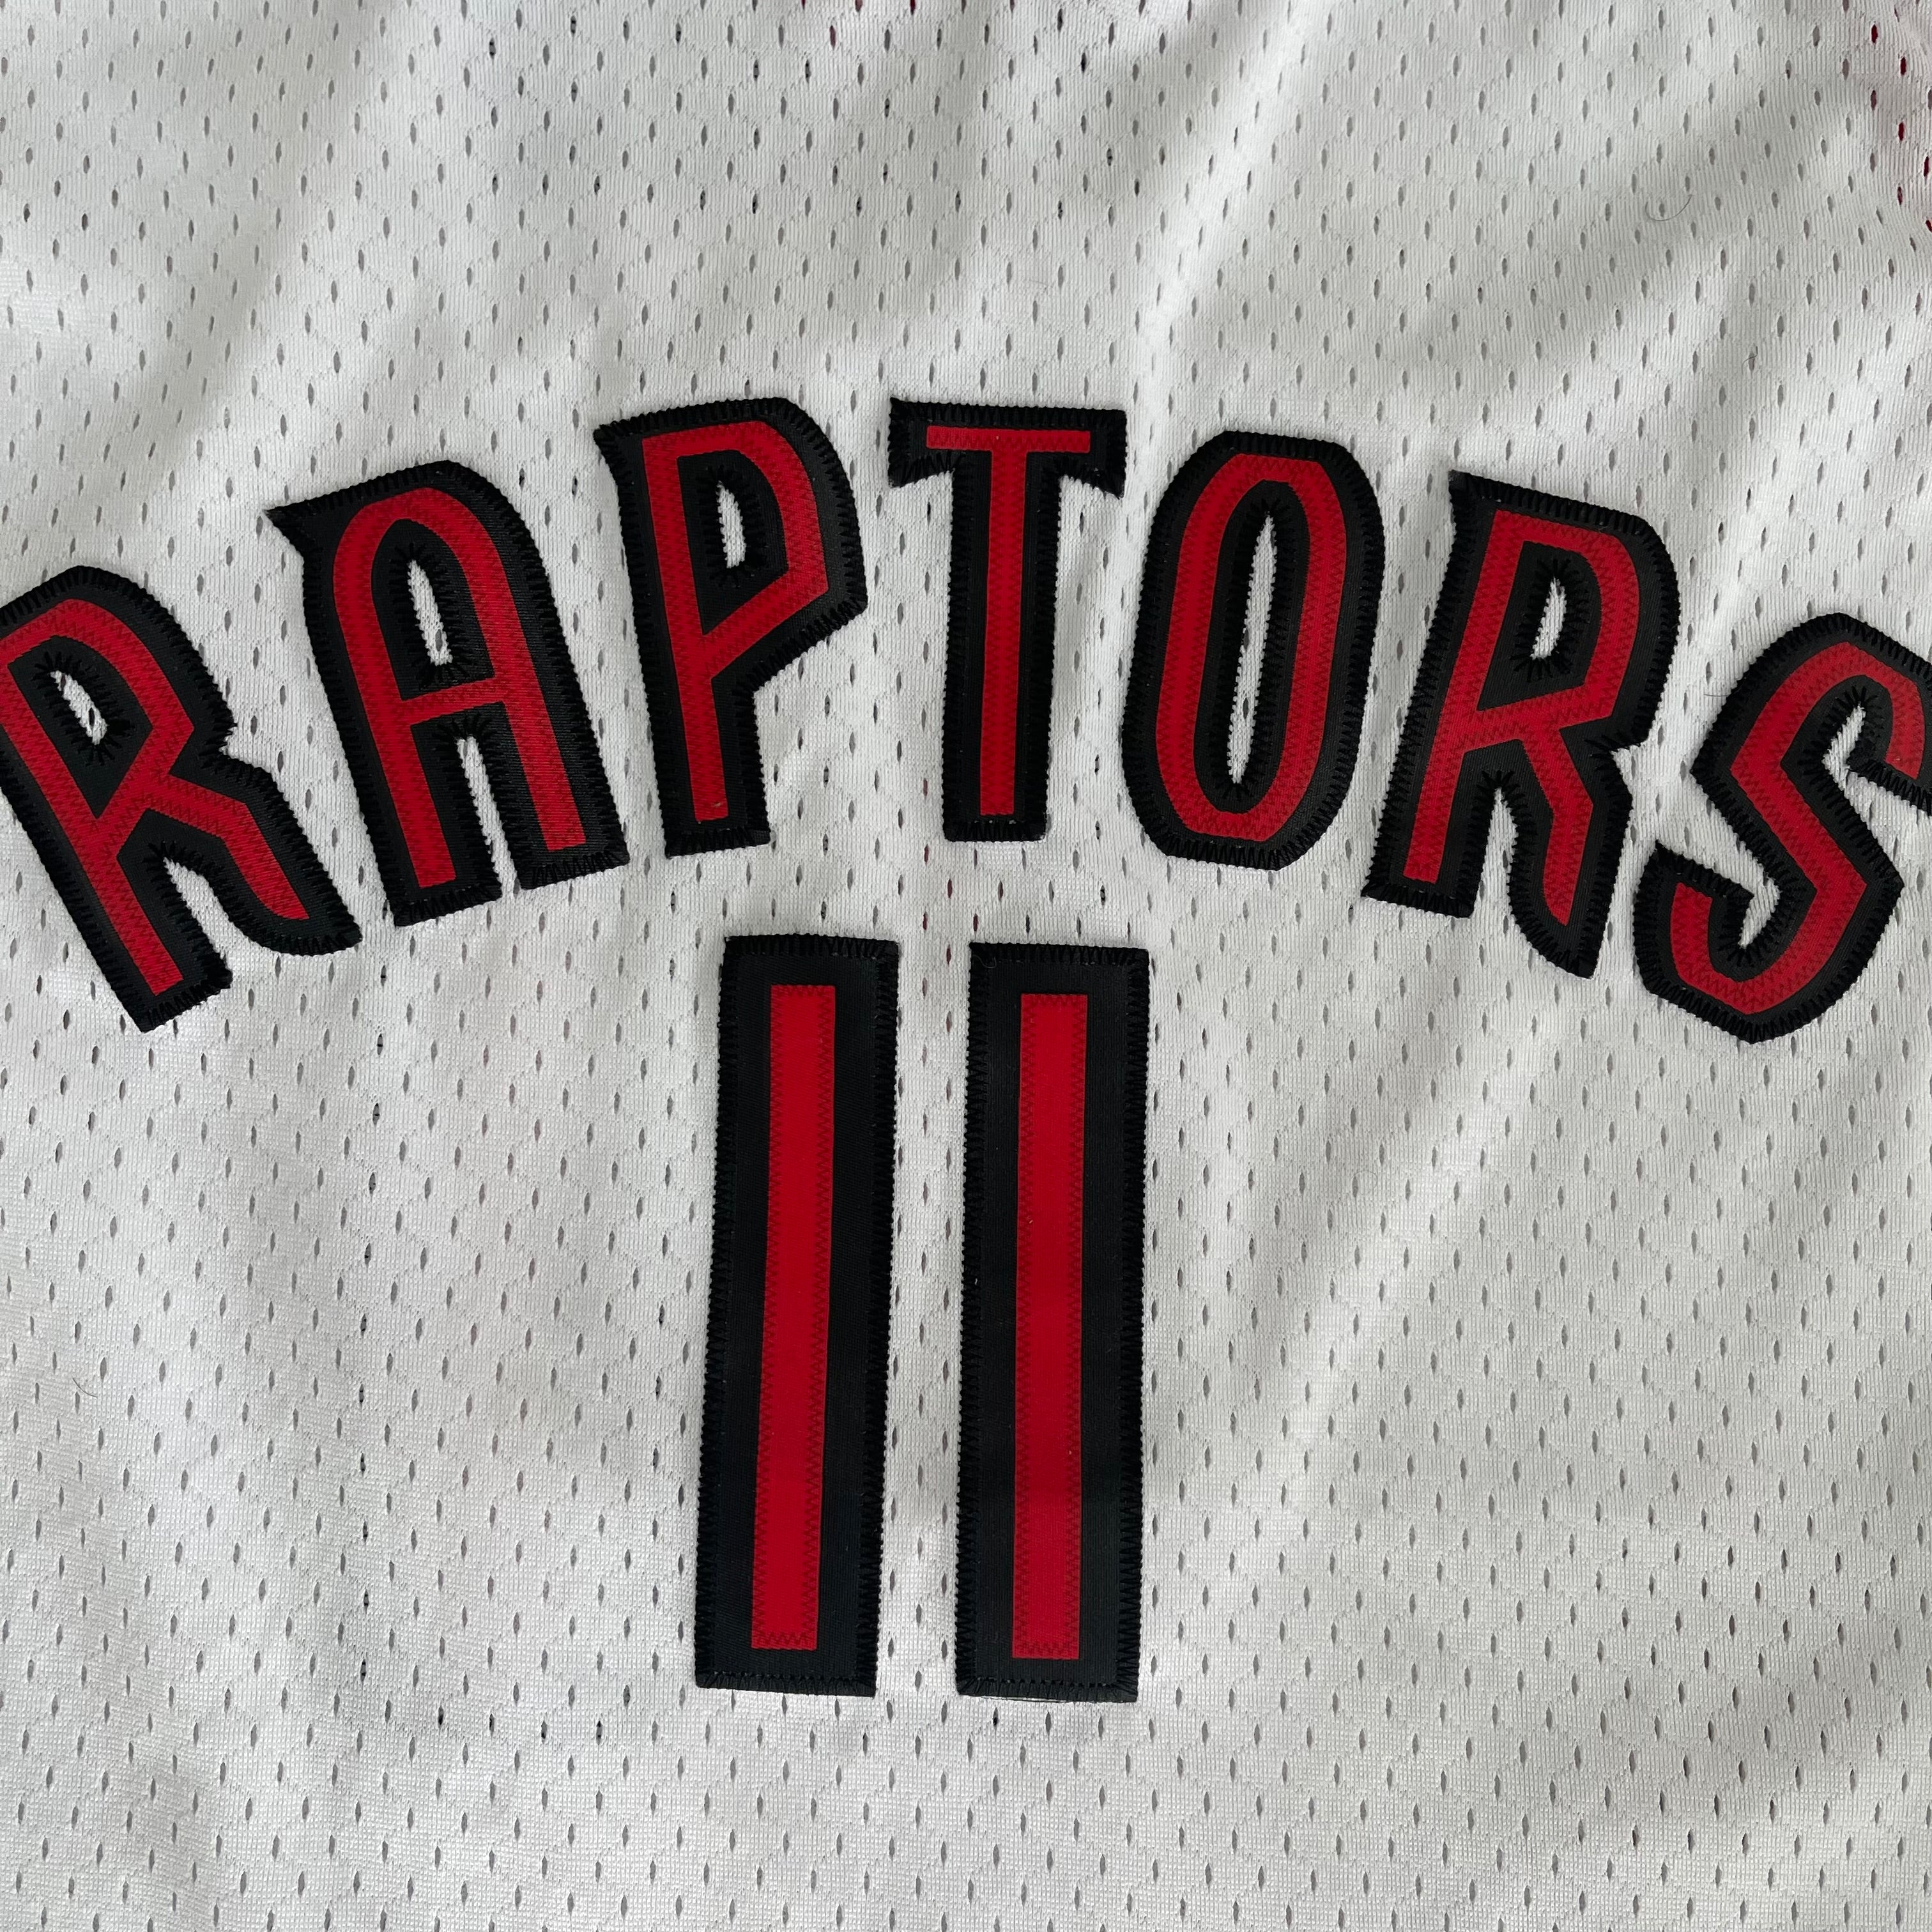 White Toronto Raptors Jersey Adidas Number 11 of TJ Ford before